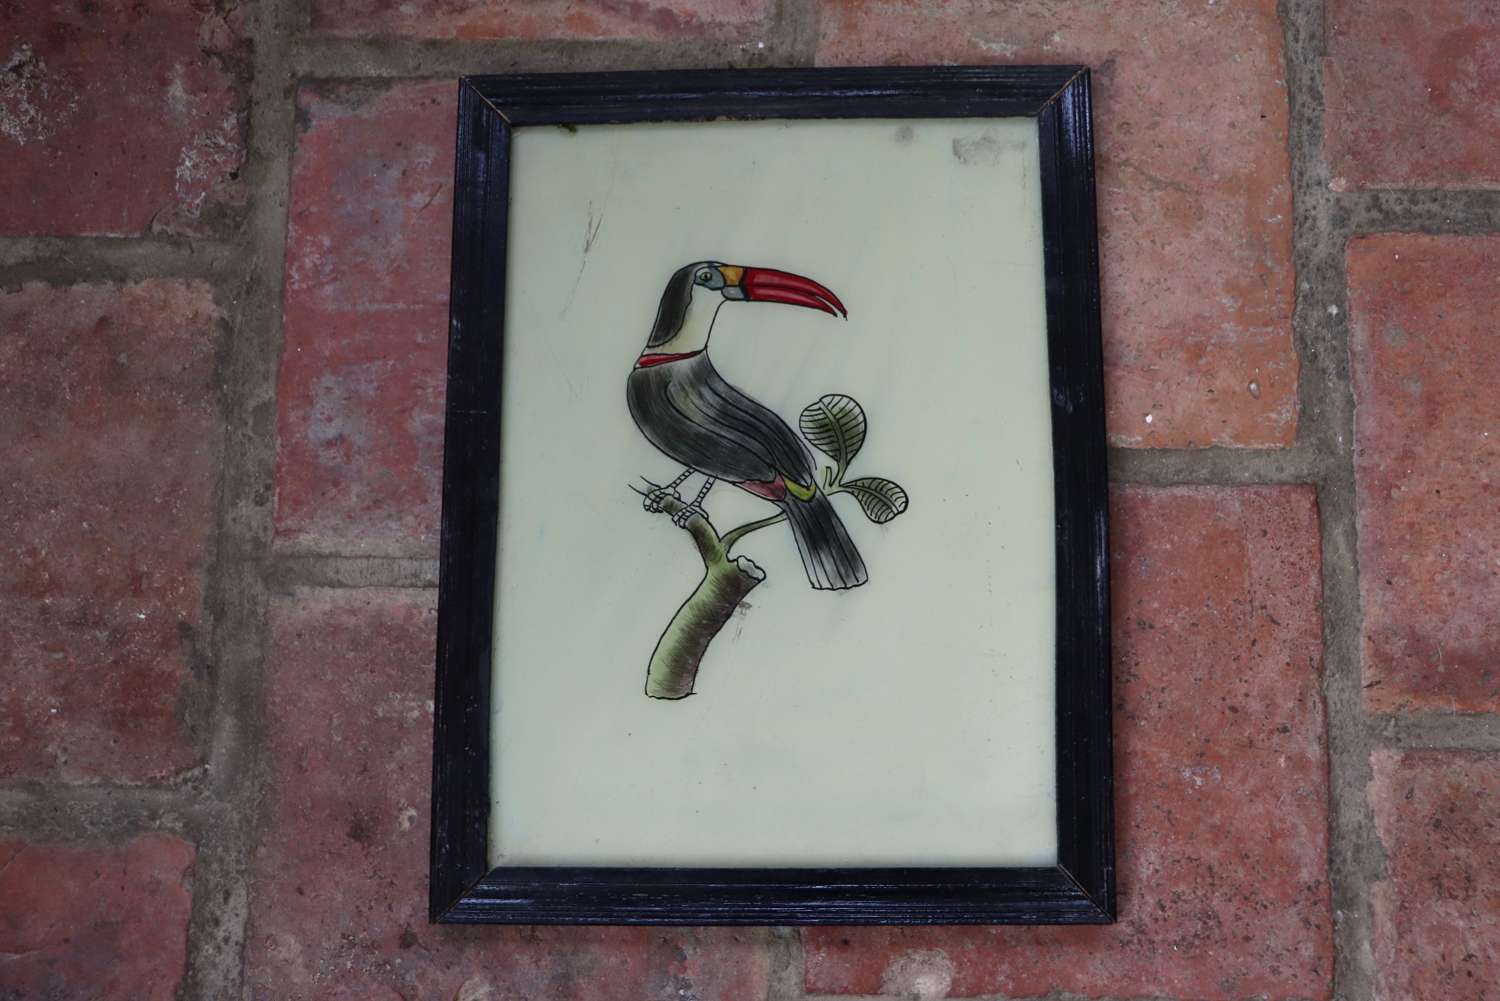 Indian reverse glass painting in old frame